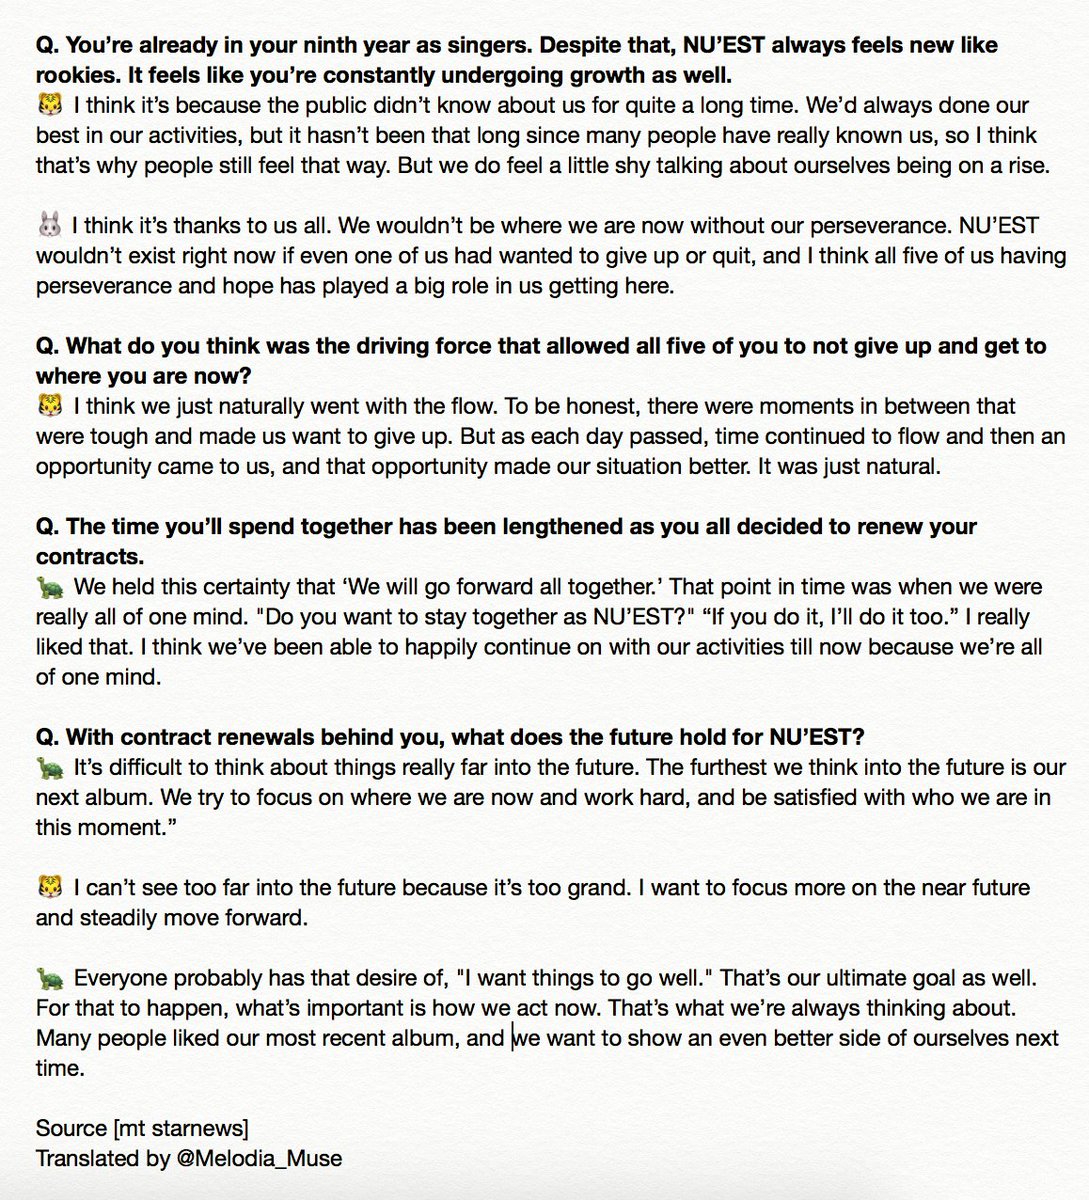 [TRANSLATION] 200530 NU'EST, "We couldn't have gotten here without our perseverance" (Interview 1) #뉴이스트  #NUEST  #JR  #아론  #백호  #민현  #렌  @NUESTNEWS (Will post PDF link once translations for all three interviews have been posted)Source  https://entertain.naver.com/read?oid=108&aid=0002866719